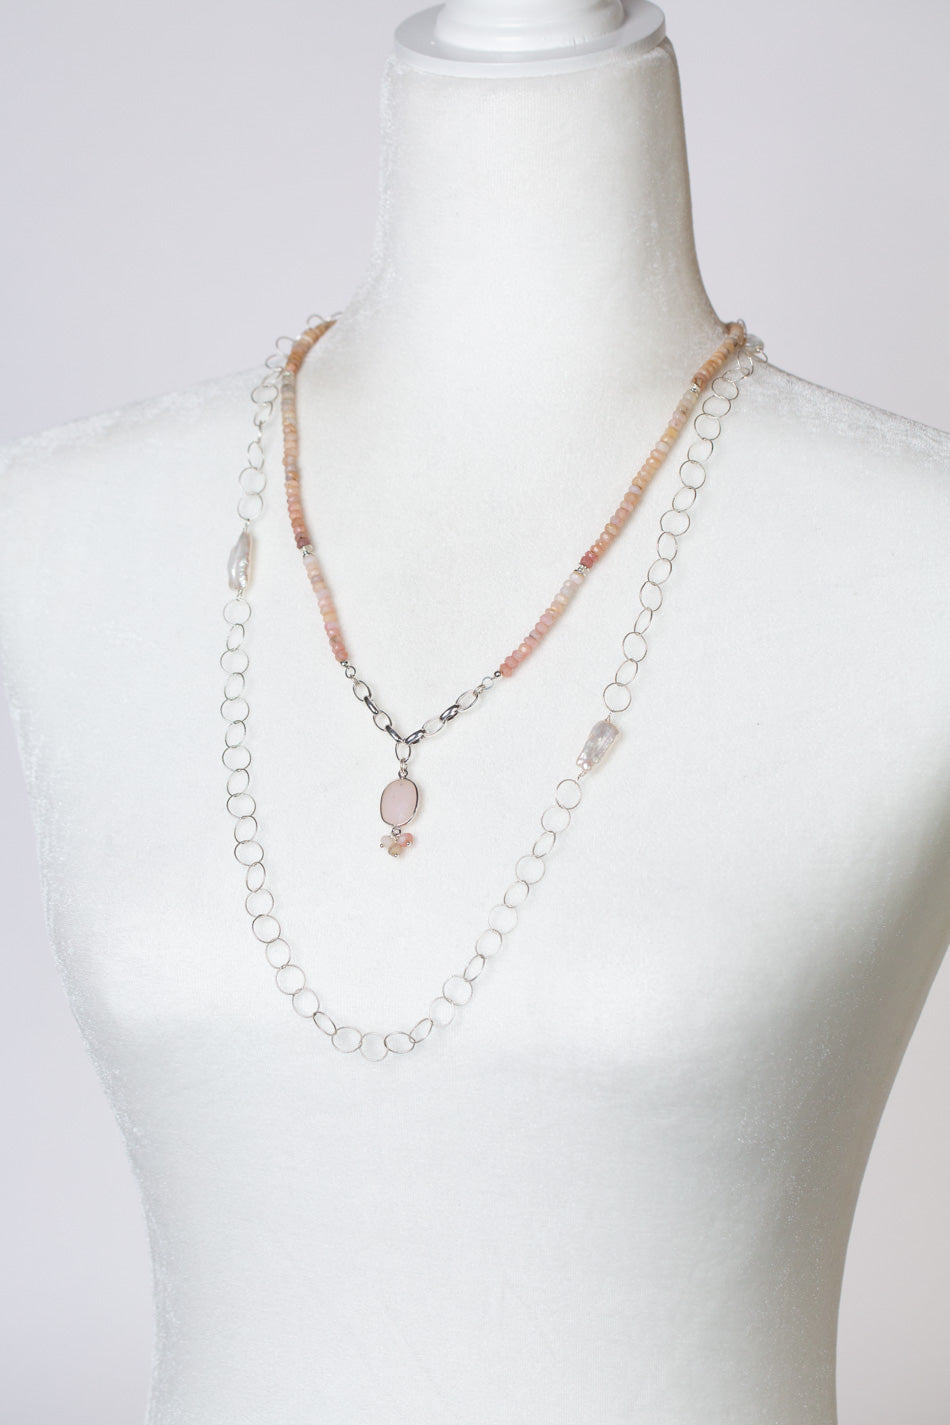 Embrace Pink Opal, Freshwater Pearl, Rose Quartz Necklaces And Earrings Set